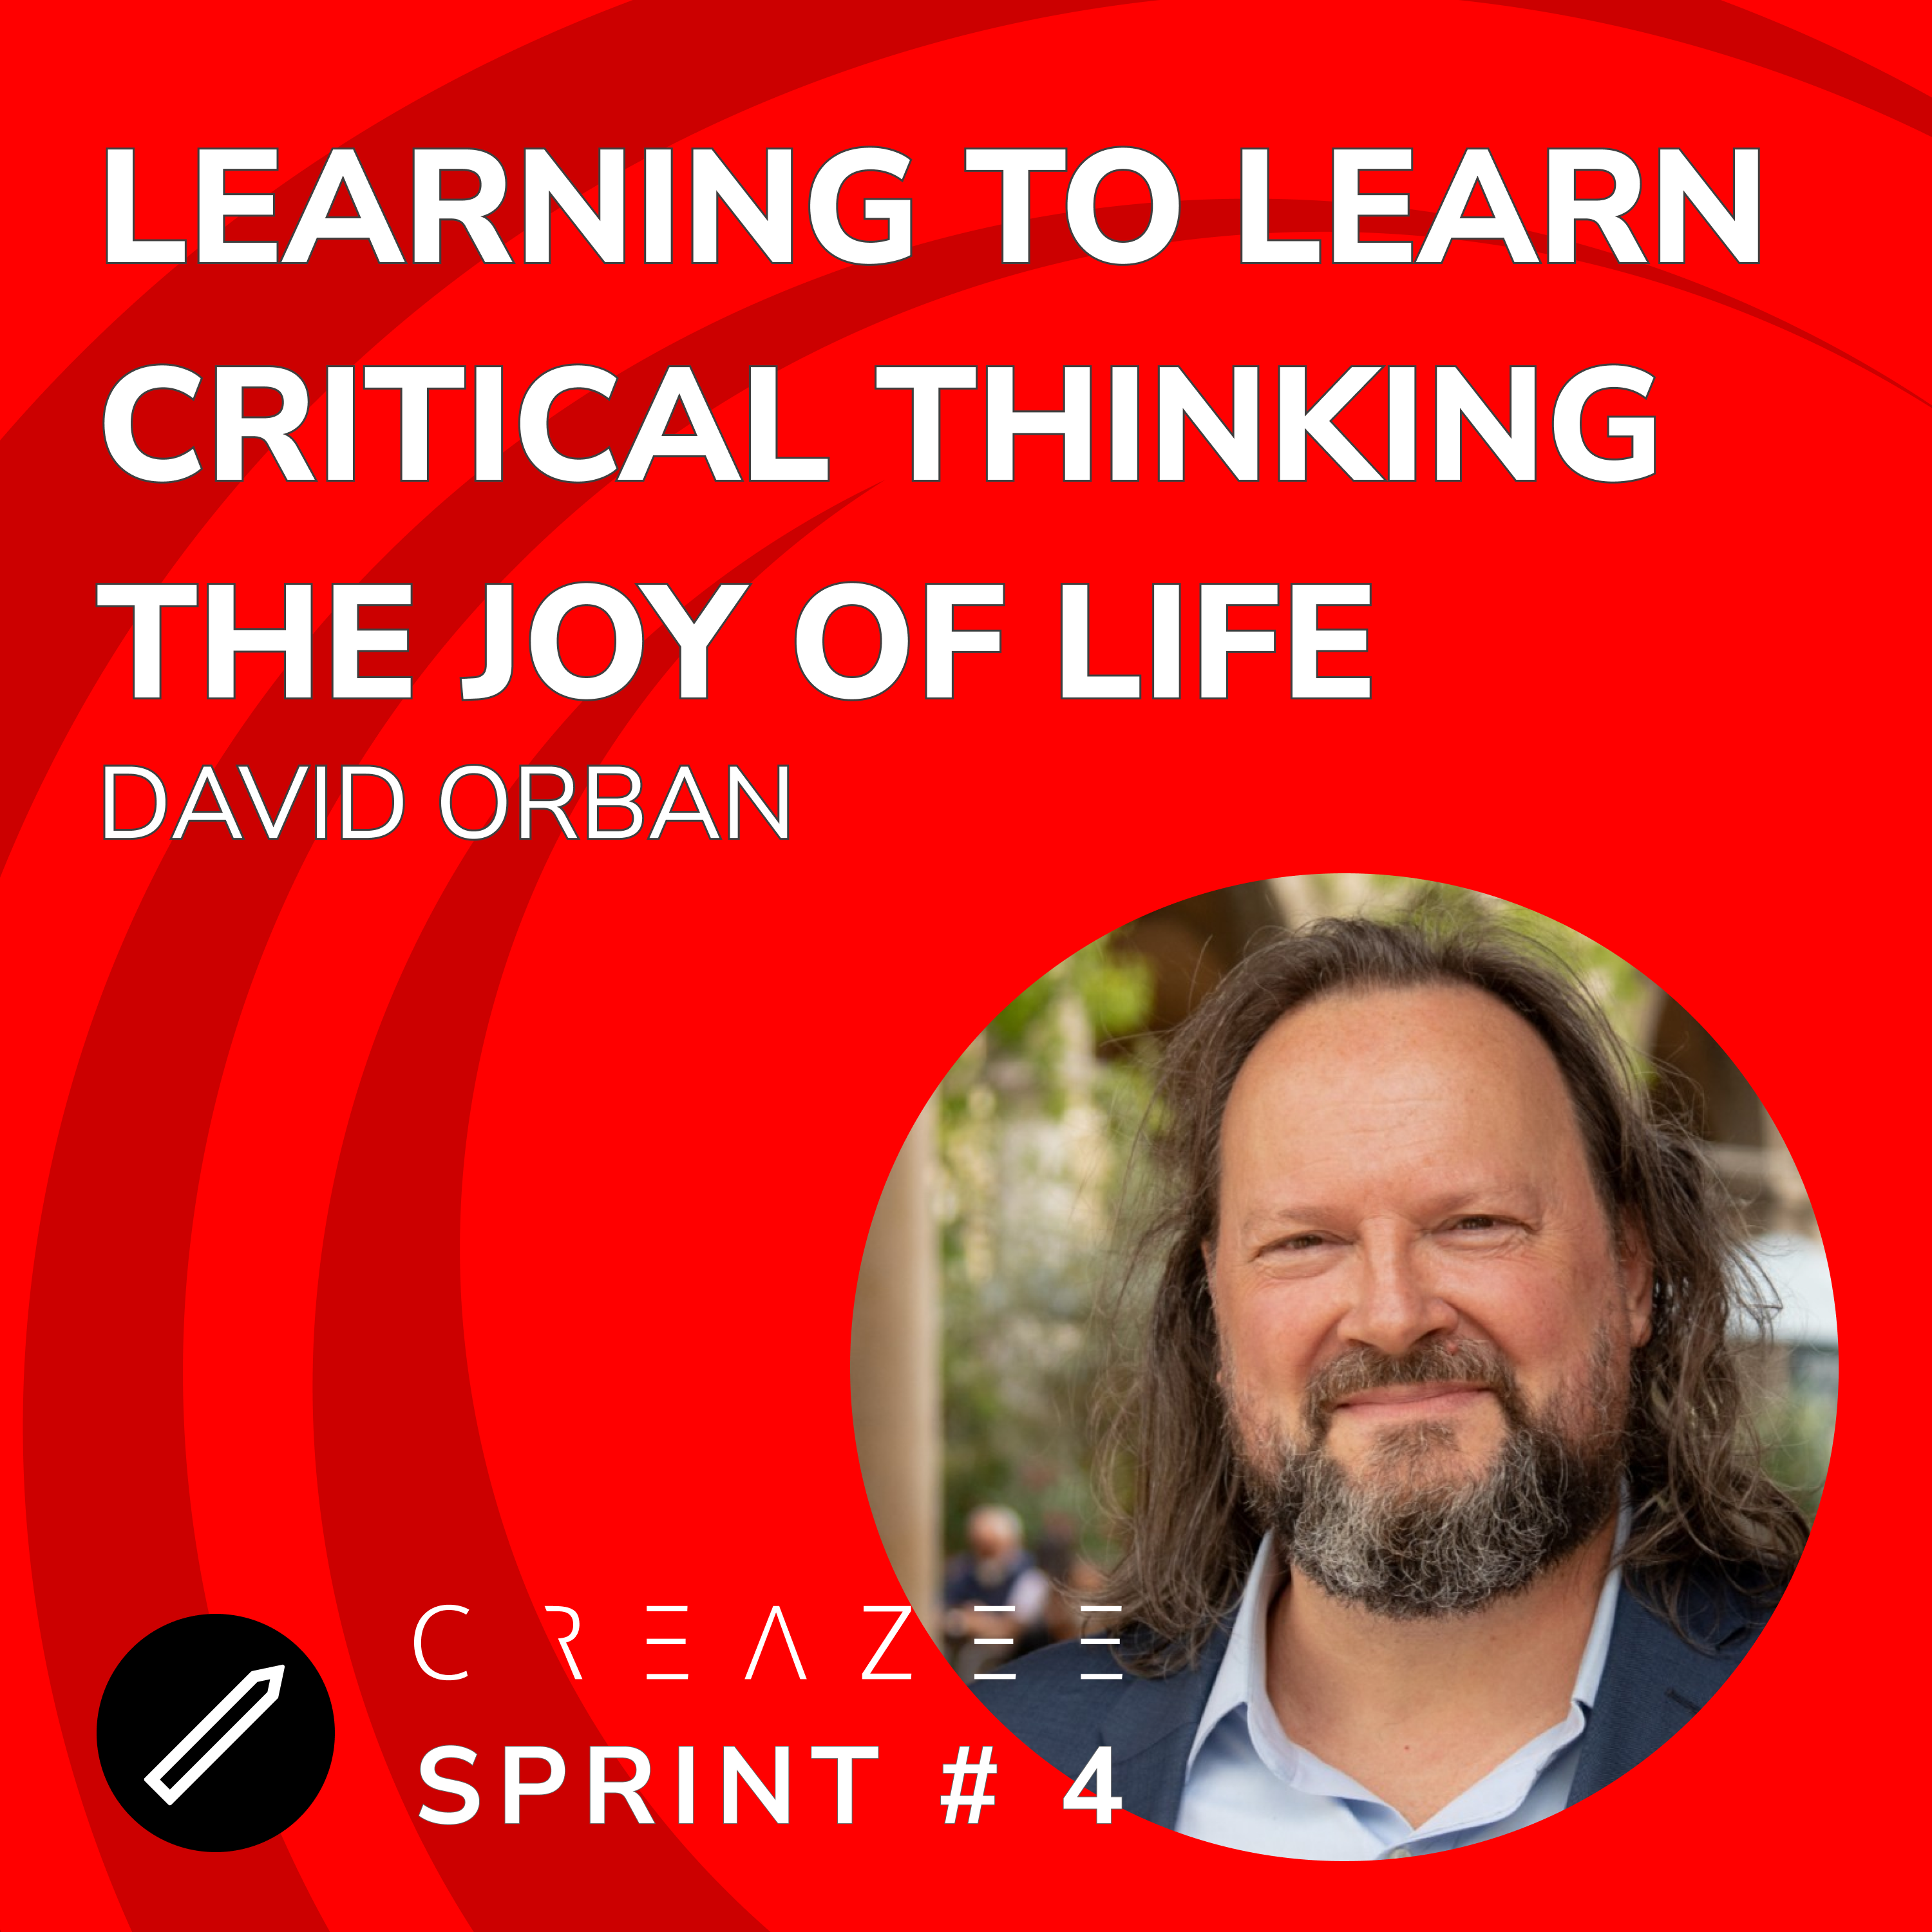 CREAZEE Sprint 4, Learning Approaches, Critical Thinking and the Joy of Life with David Orban